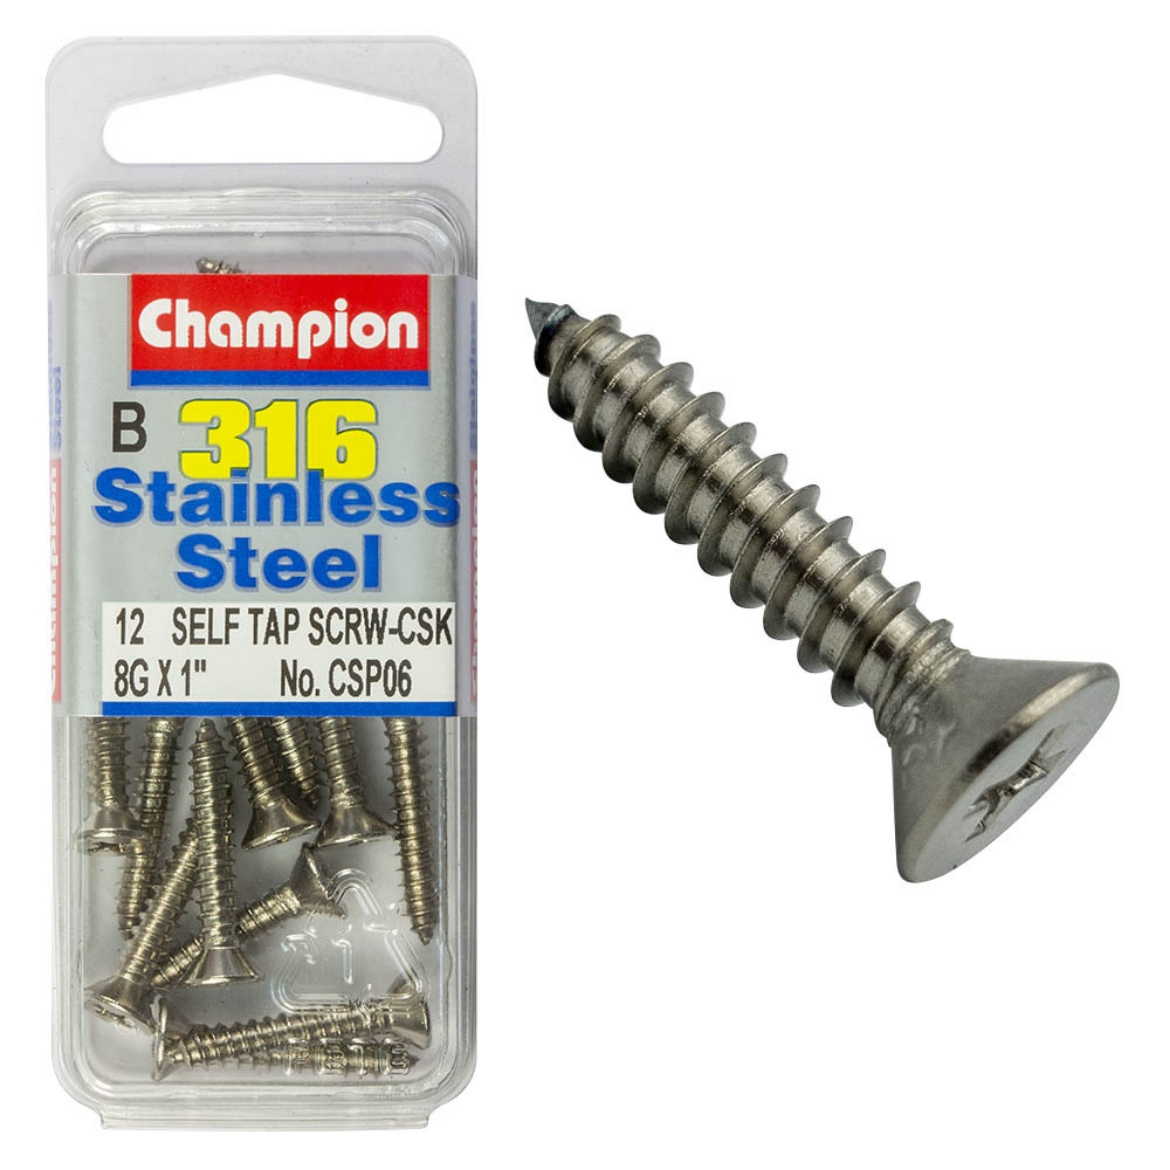 Picture of SELF TAPP SCREWS-CSK 8G x 1 (Pkt.12)